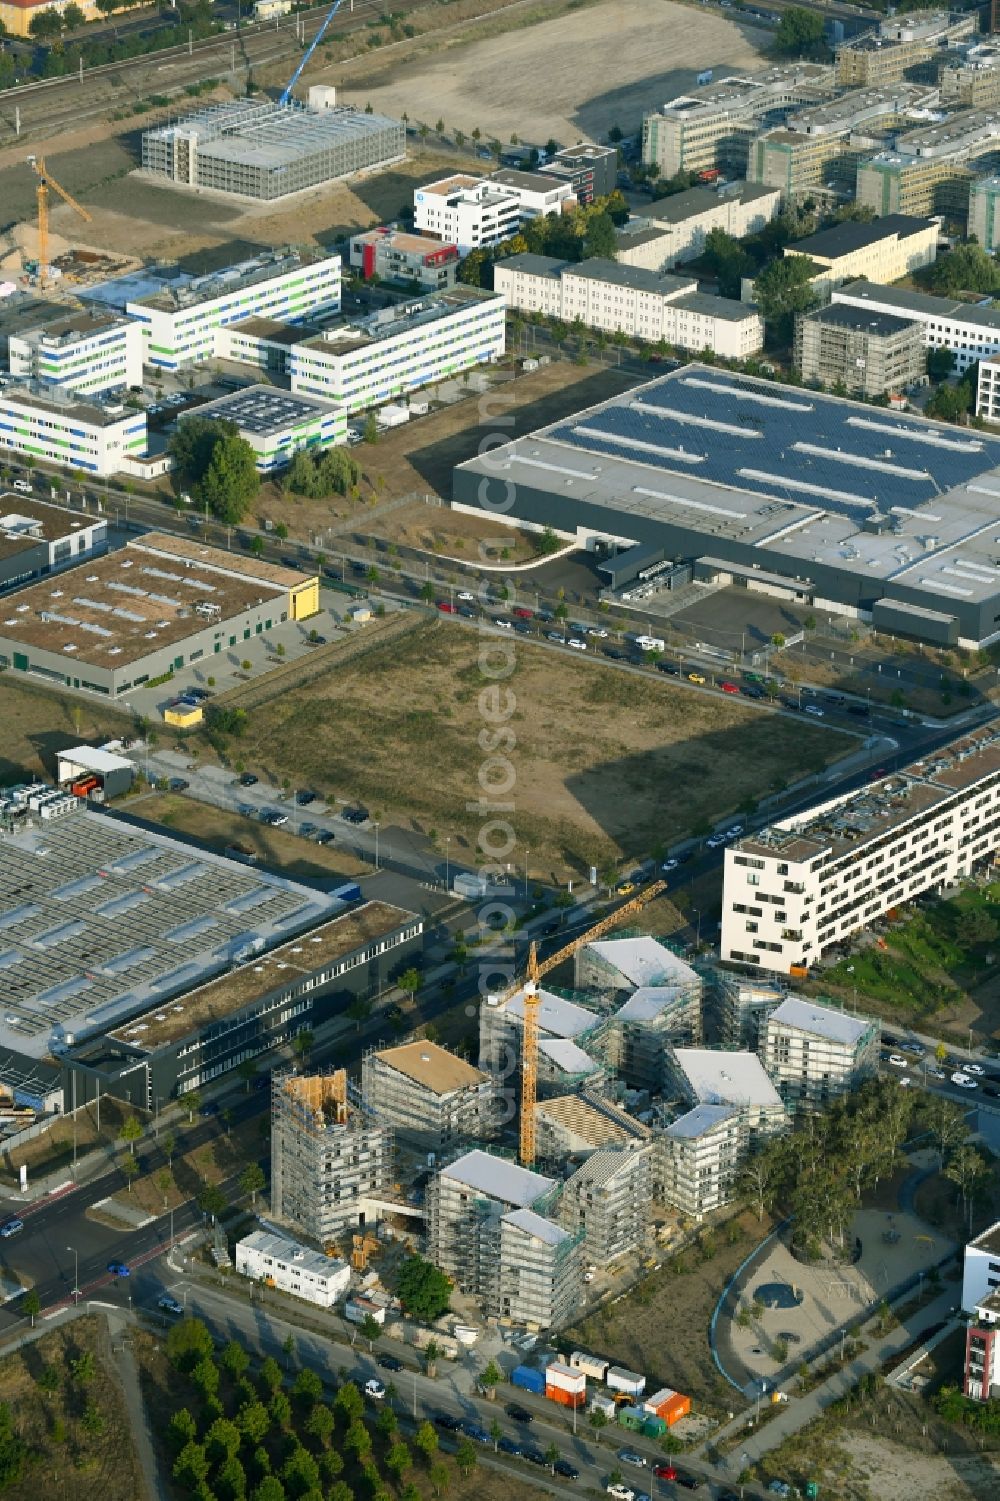 Berlin from the bird's eye view: Construction site to build a new multi-family residential complex Future Living Homes between Gross-Berliner Damm - Konrad-Zuse-Strasse and Hermann-Dorner-Allee in the district Adlershof - Johannestal in Berlin, Germany